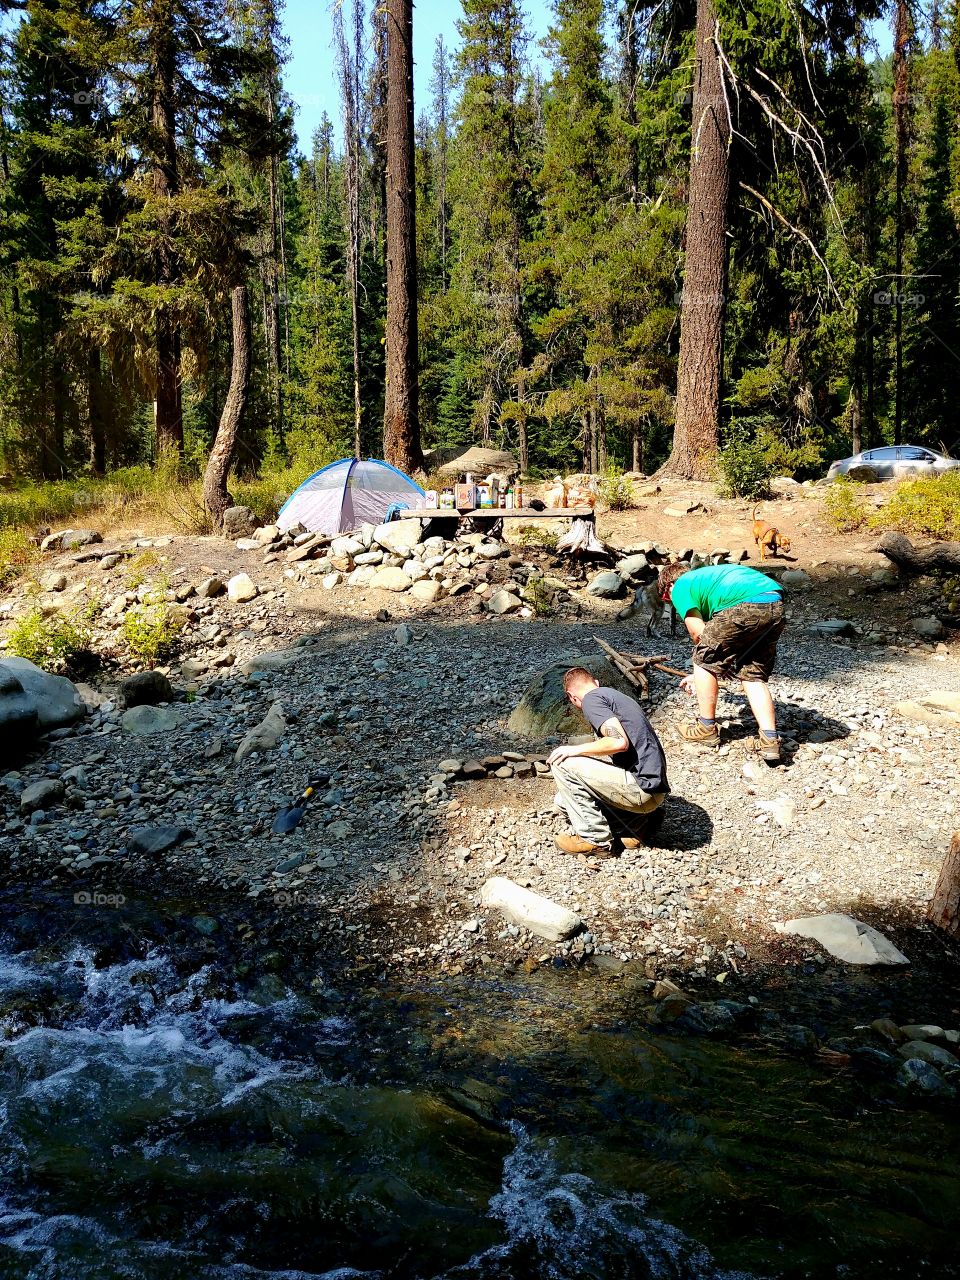 Quick pic of the campsite. It was free, off the beaten trail, and big enough for 10 of us to have a super chill weekend.